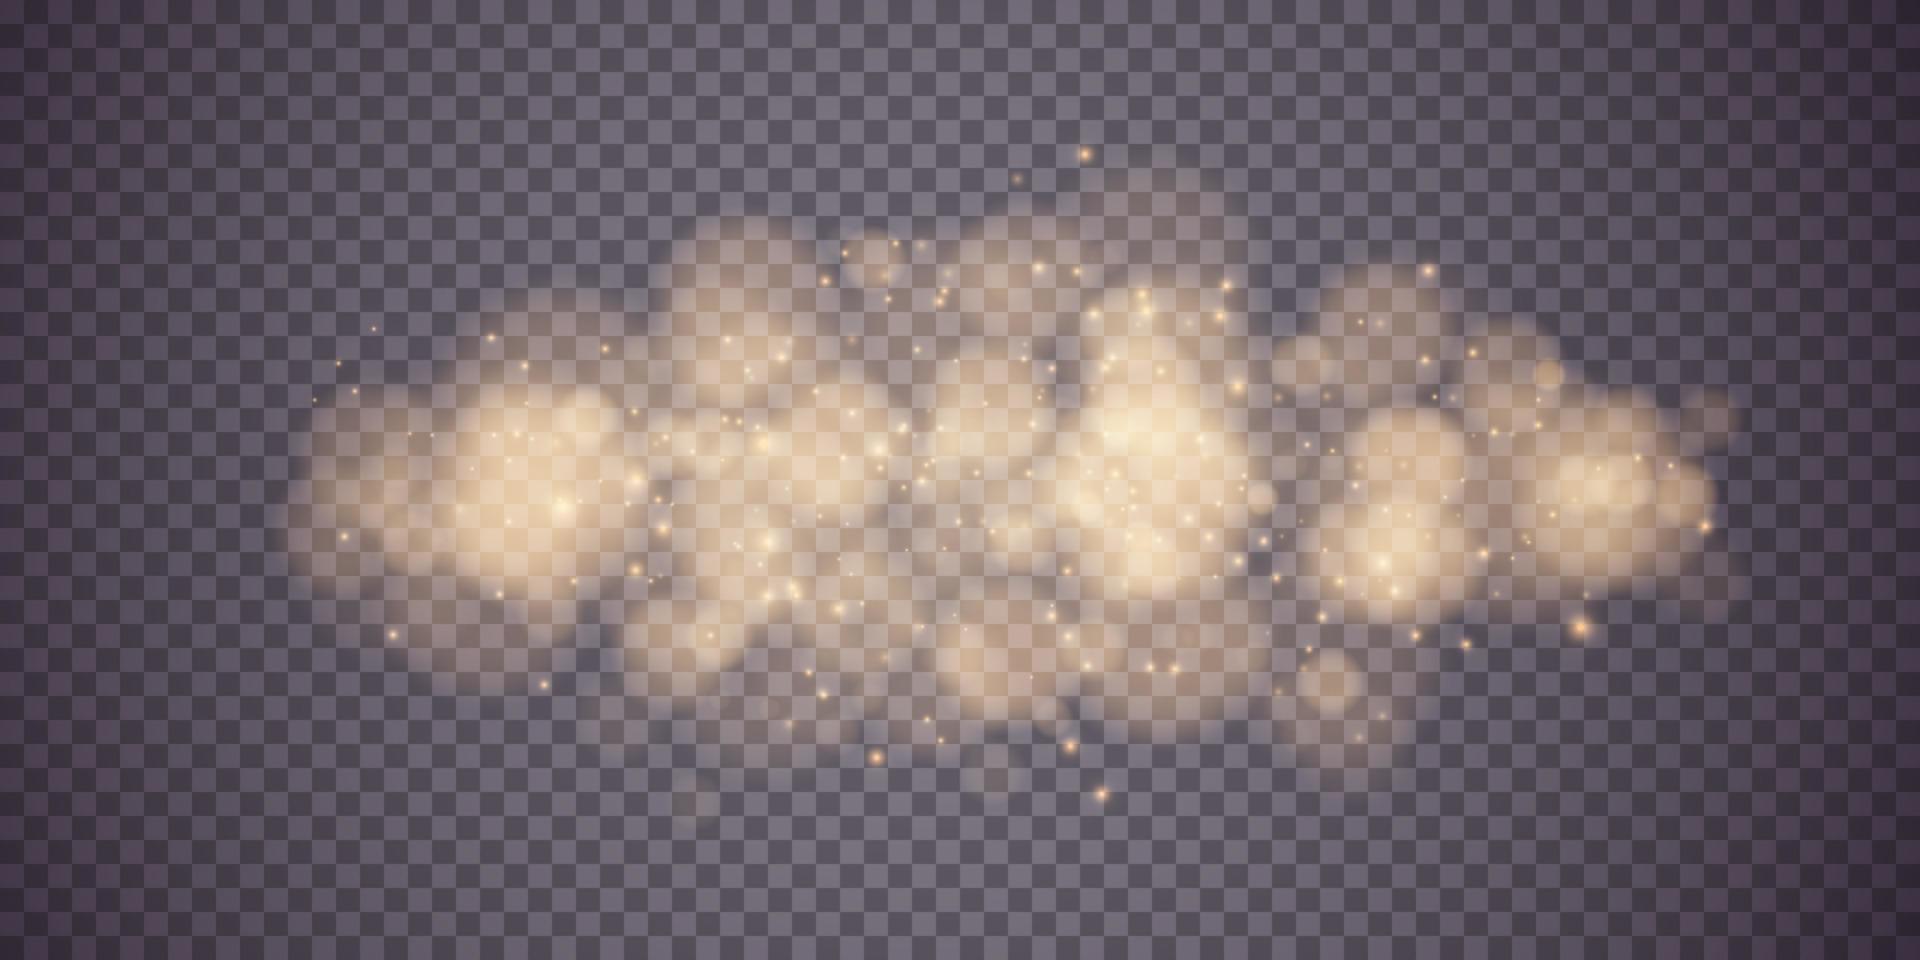 Golden bokeh lights with glowing particles isolated. vector